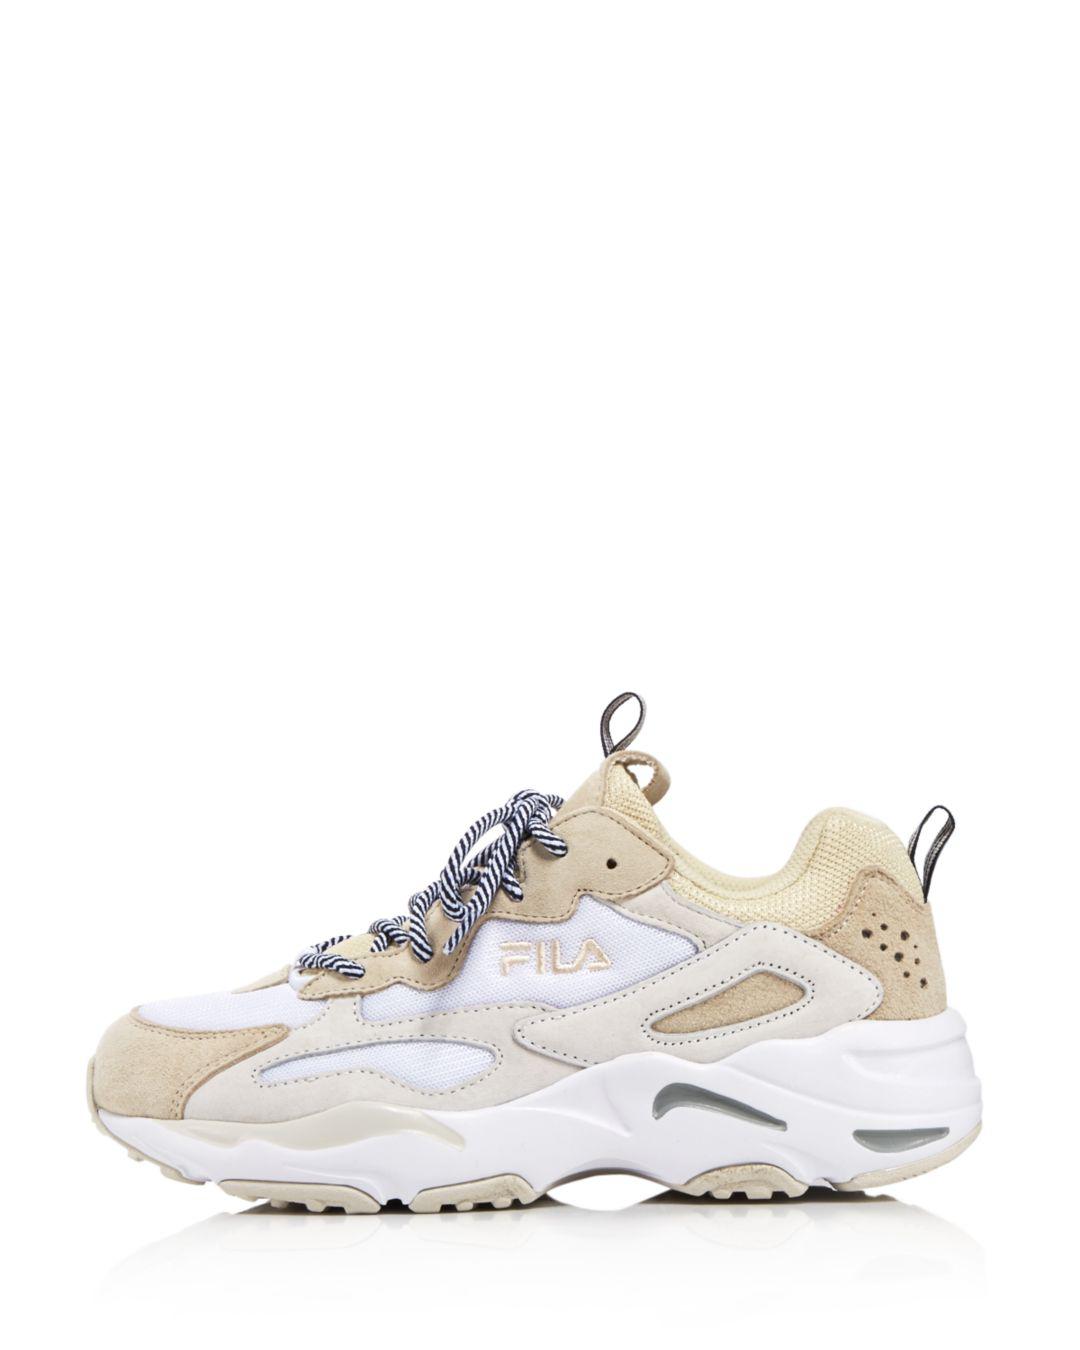 fila ray tracer taupe